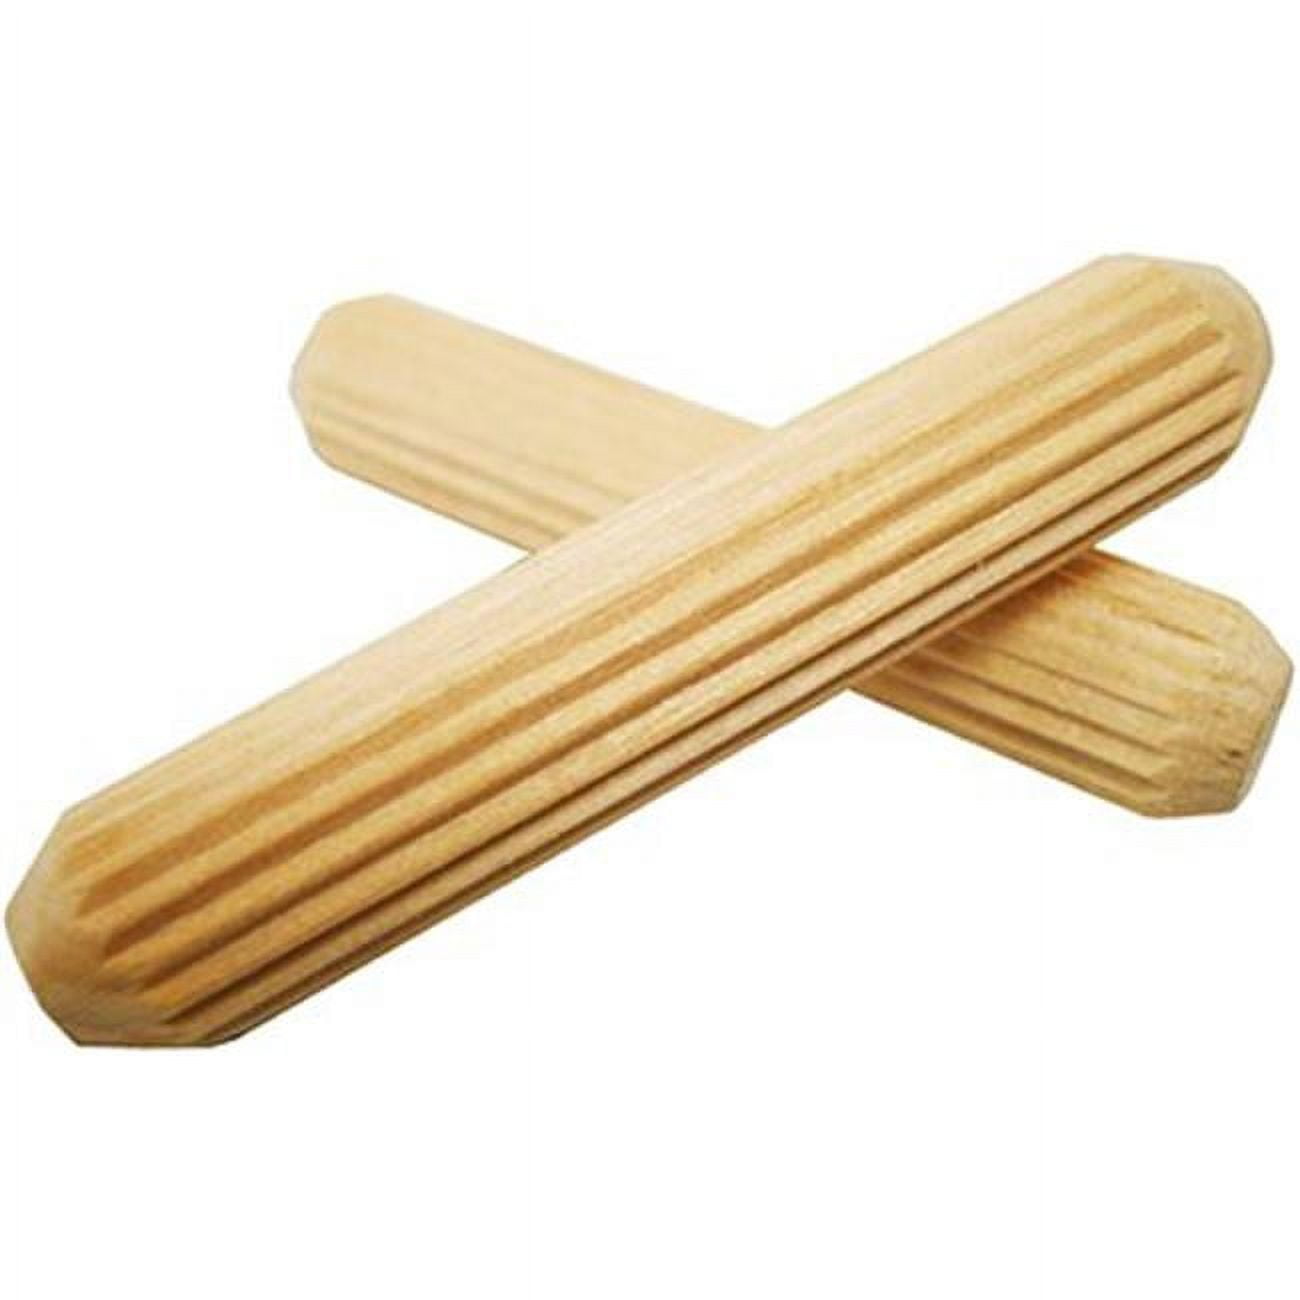 F6200m 0.38 X 2 In. Wooden Dowel Pin - Pack Of 15